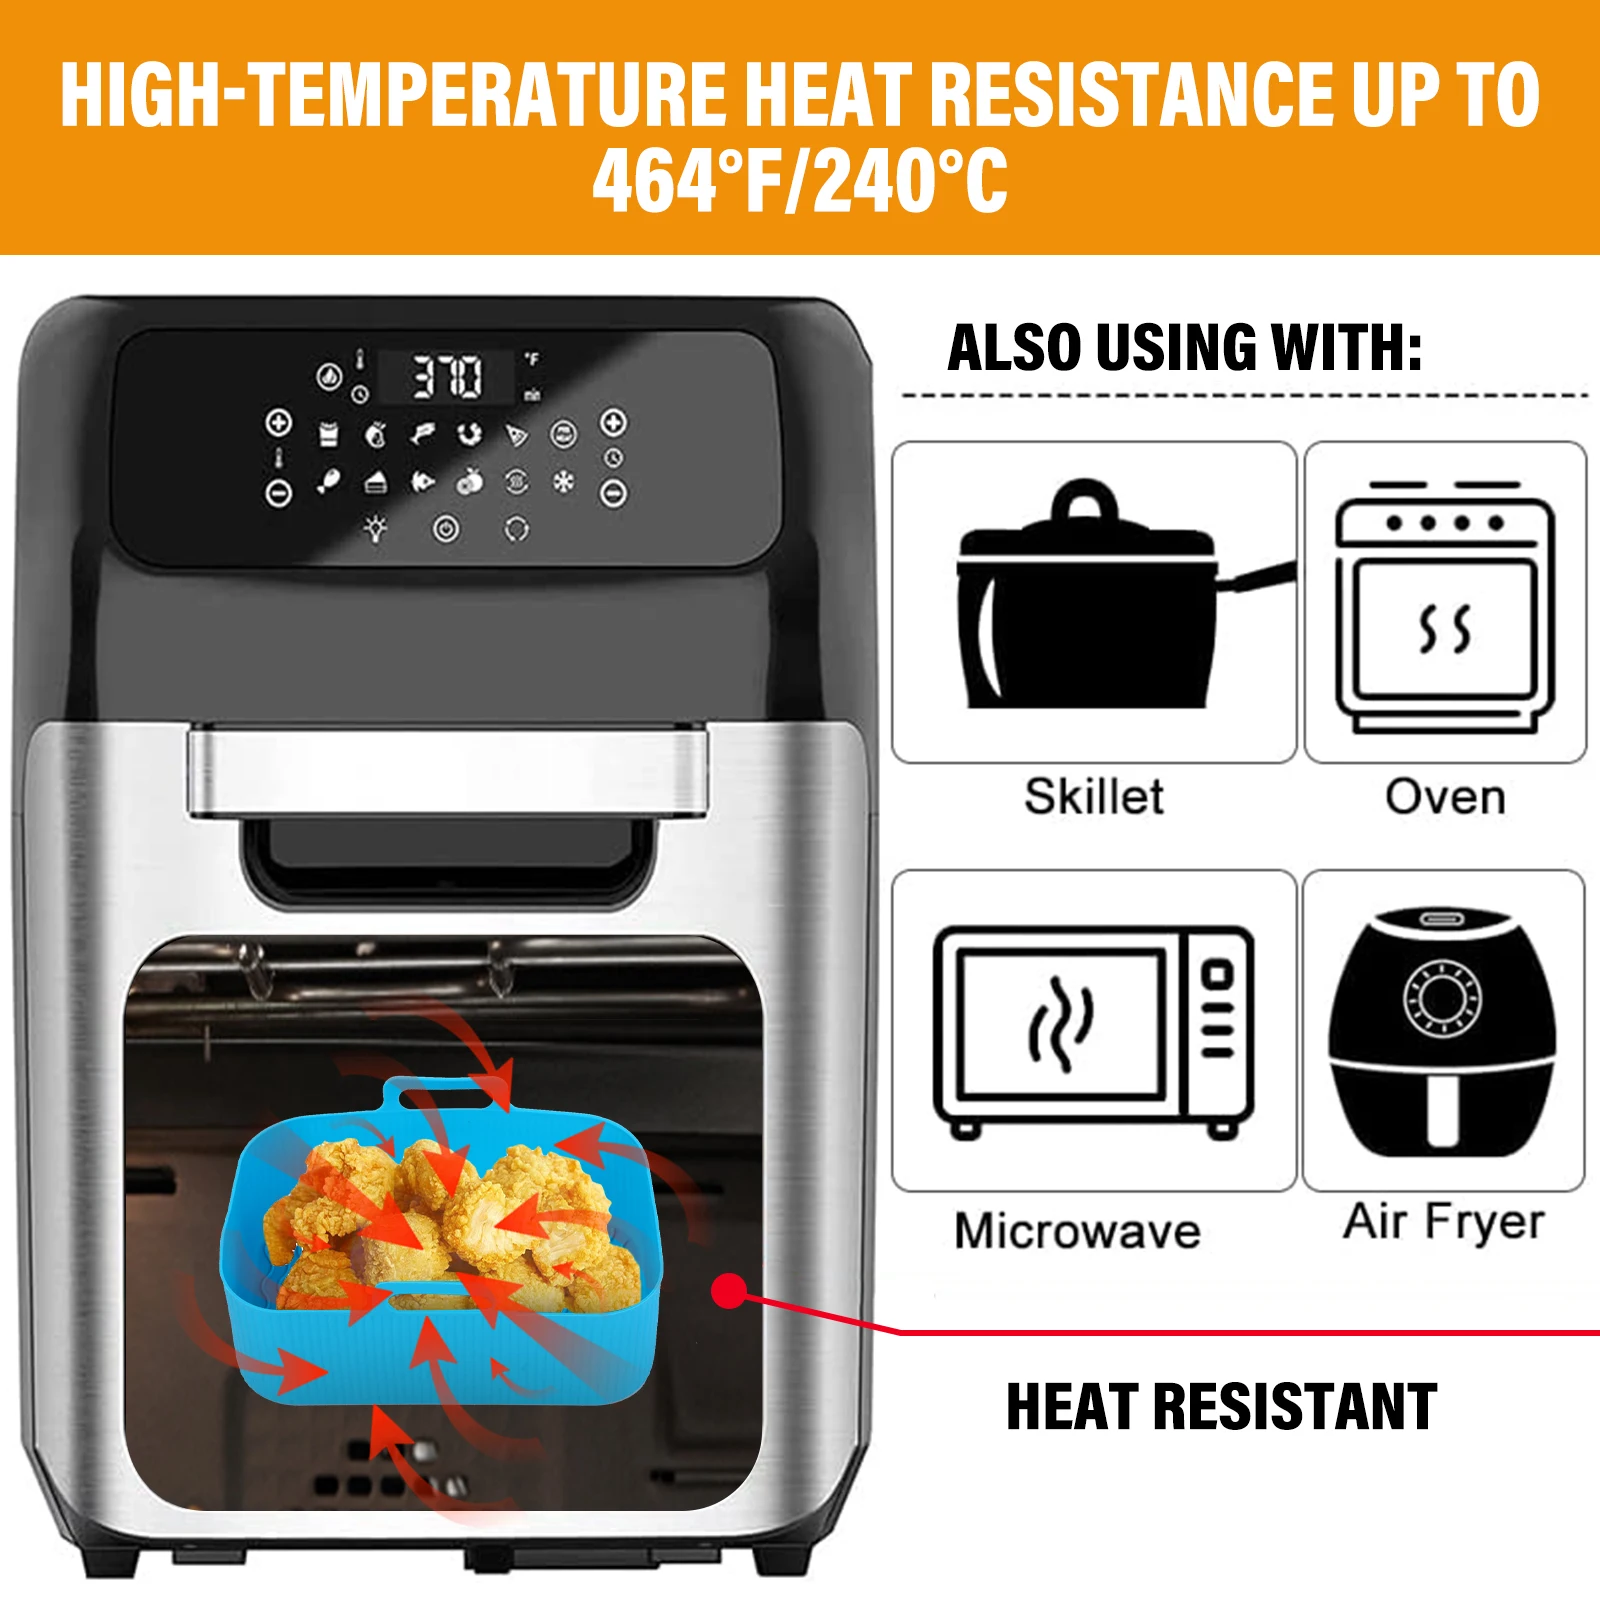 https://ae01.alicdn.com/kf/S4777aef1499a47b983978a307adfc922k/2pcs-Air-Fryer-Silicone-Basket-Rectangle-Oven-Baking-Tray-Basket-Thick-Reusable-Liner-Insert-Dish-For.jpg